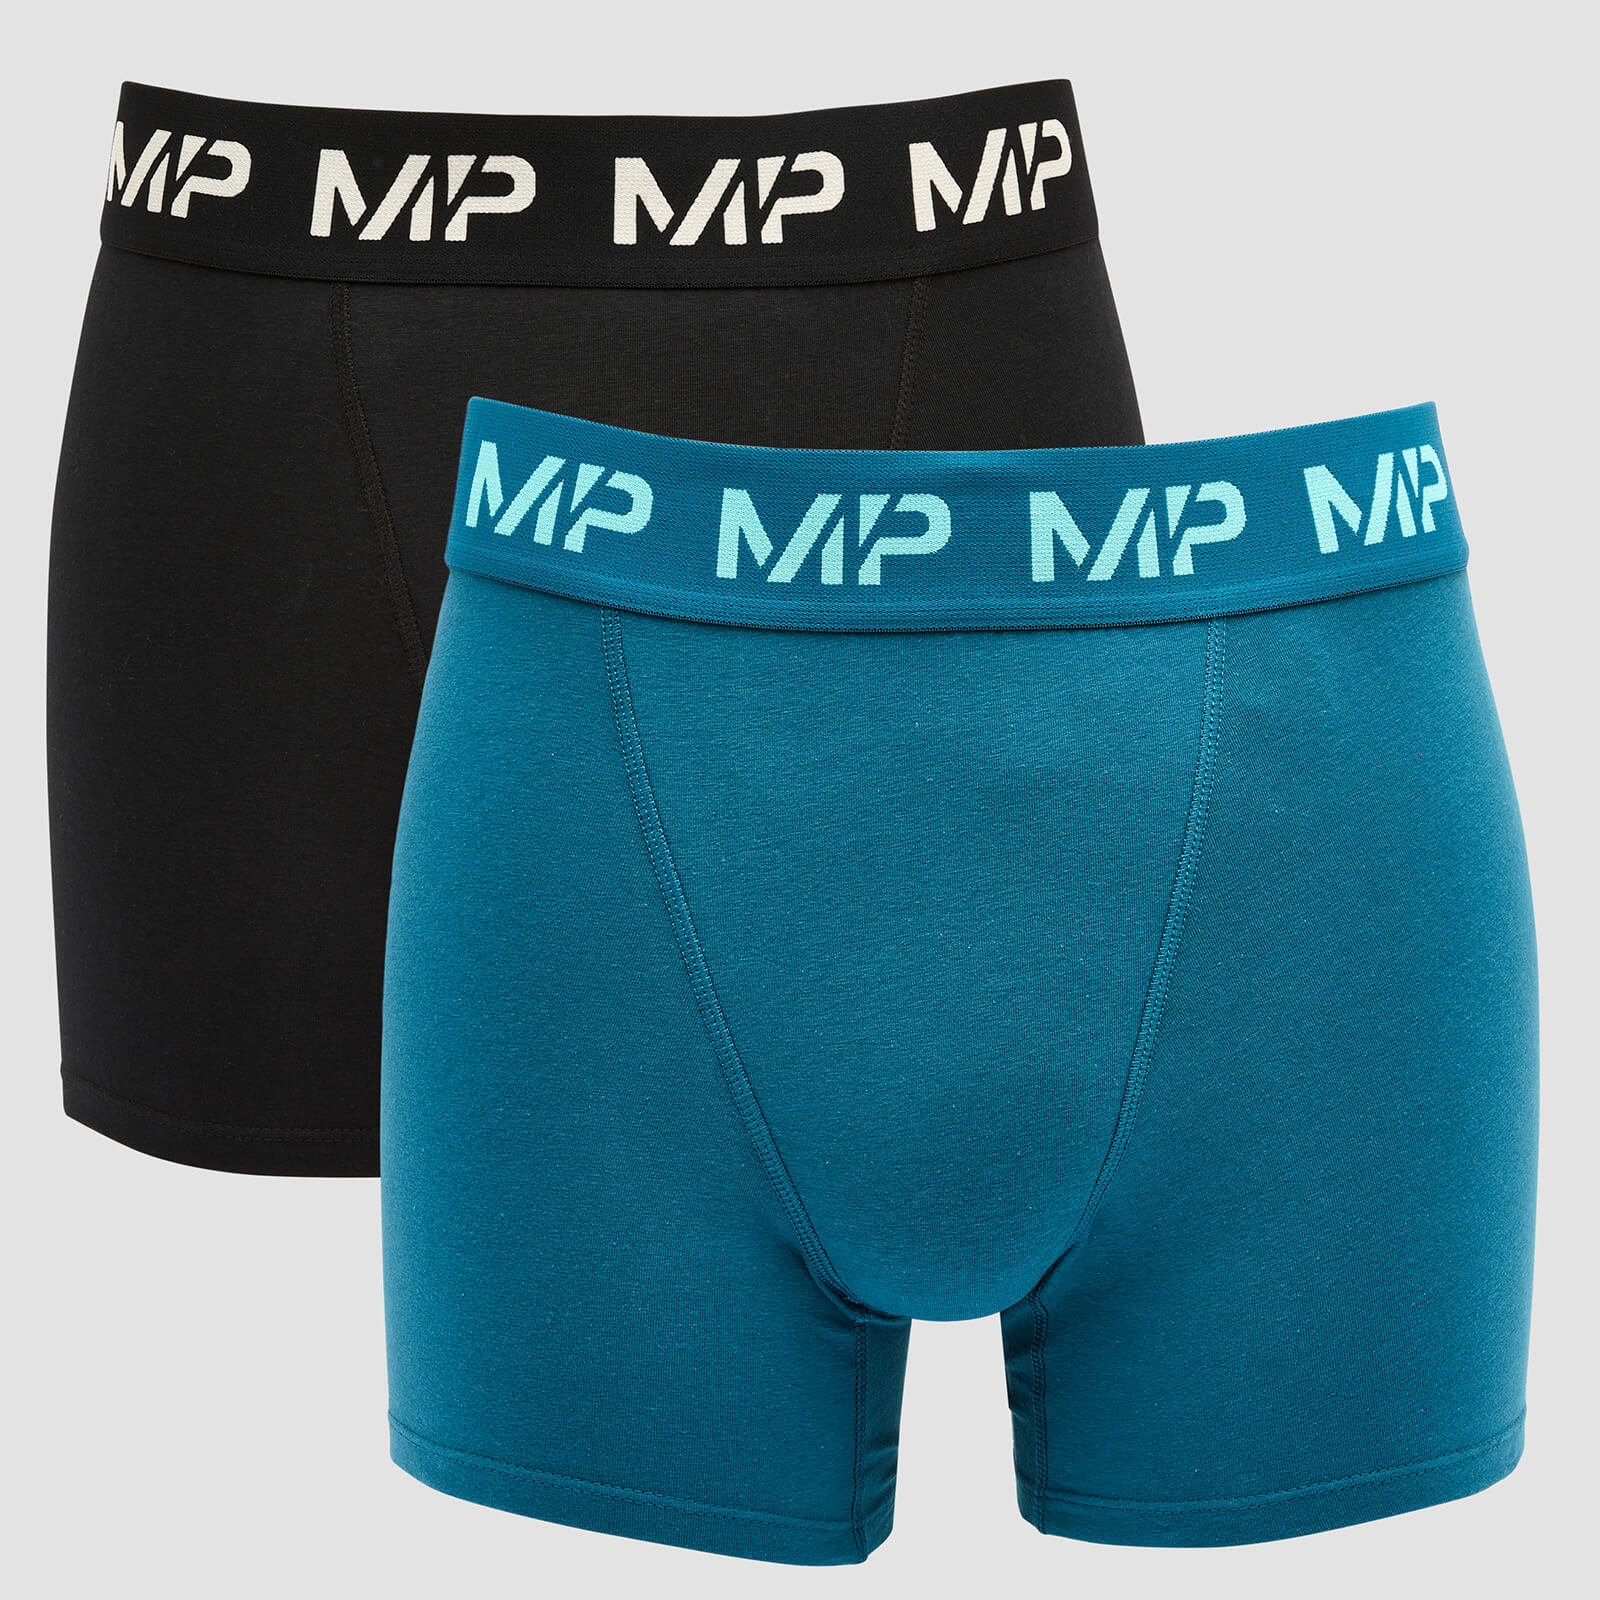 MP Men's Limited Edition Impact Essentials Boxers (2 Pack) - Black/Teal - XXS